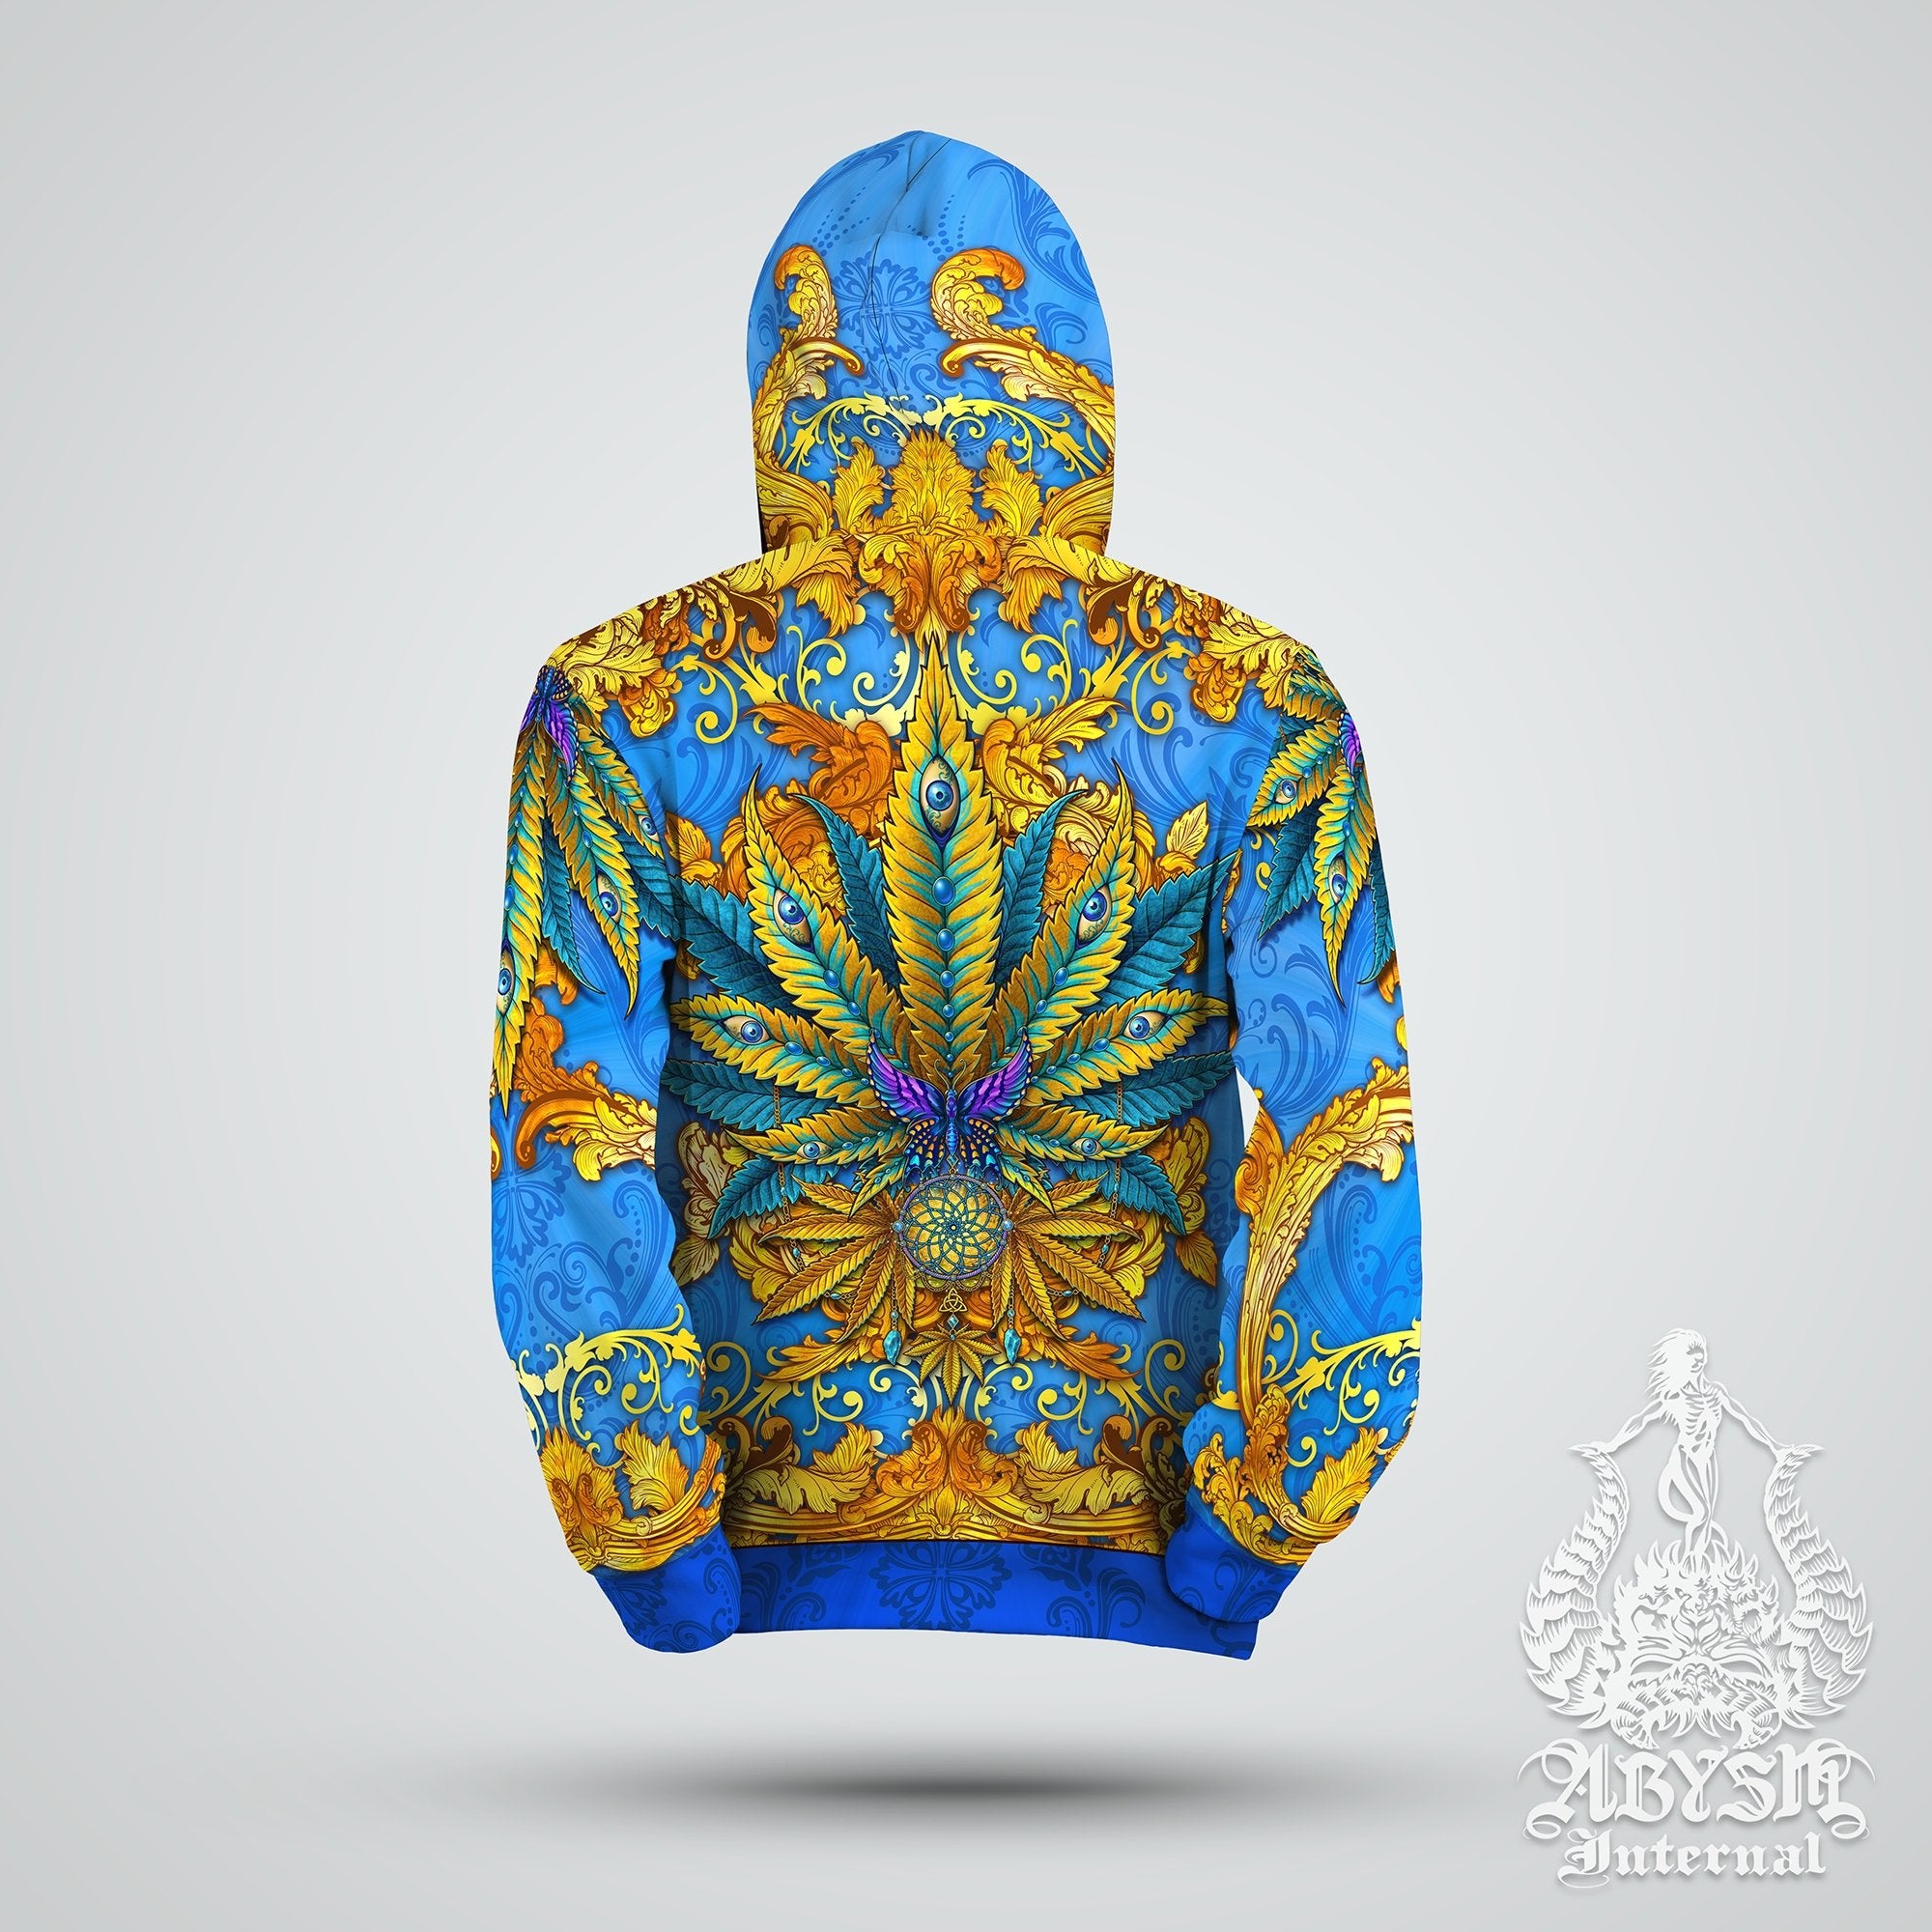 Weed Hoodie, Cannabis Festival Sweater, Hippie Outfit, Trippy Streetwear, Indie and Alternative Clothing, Unisex, 420 Gift - Marijuana, Cyan and Gold - Abysm Internal